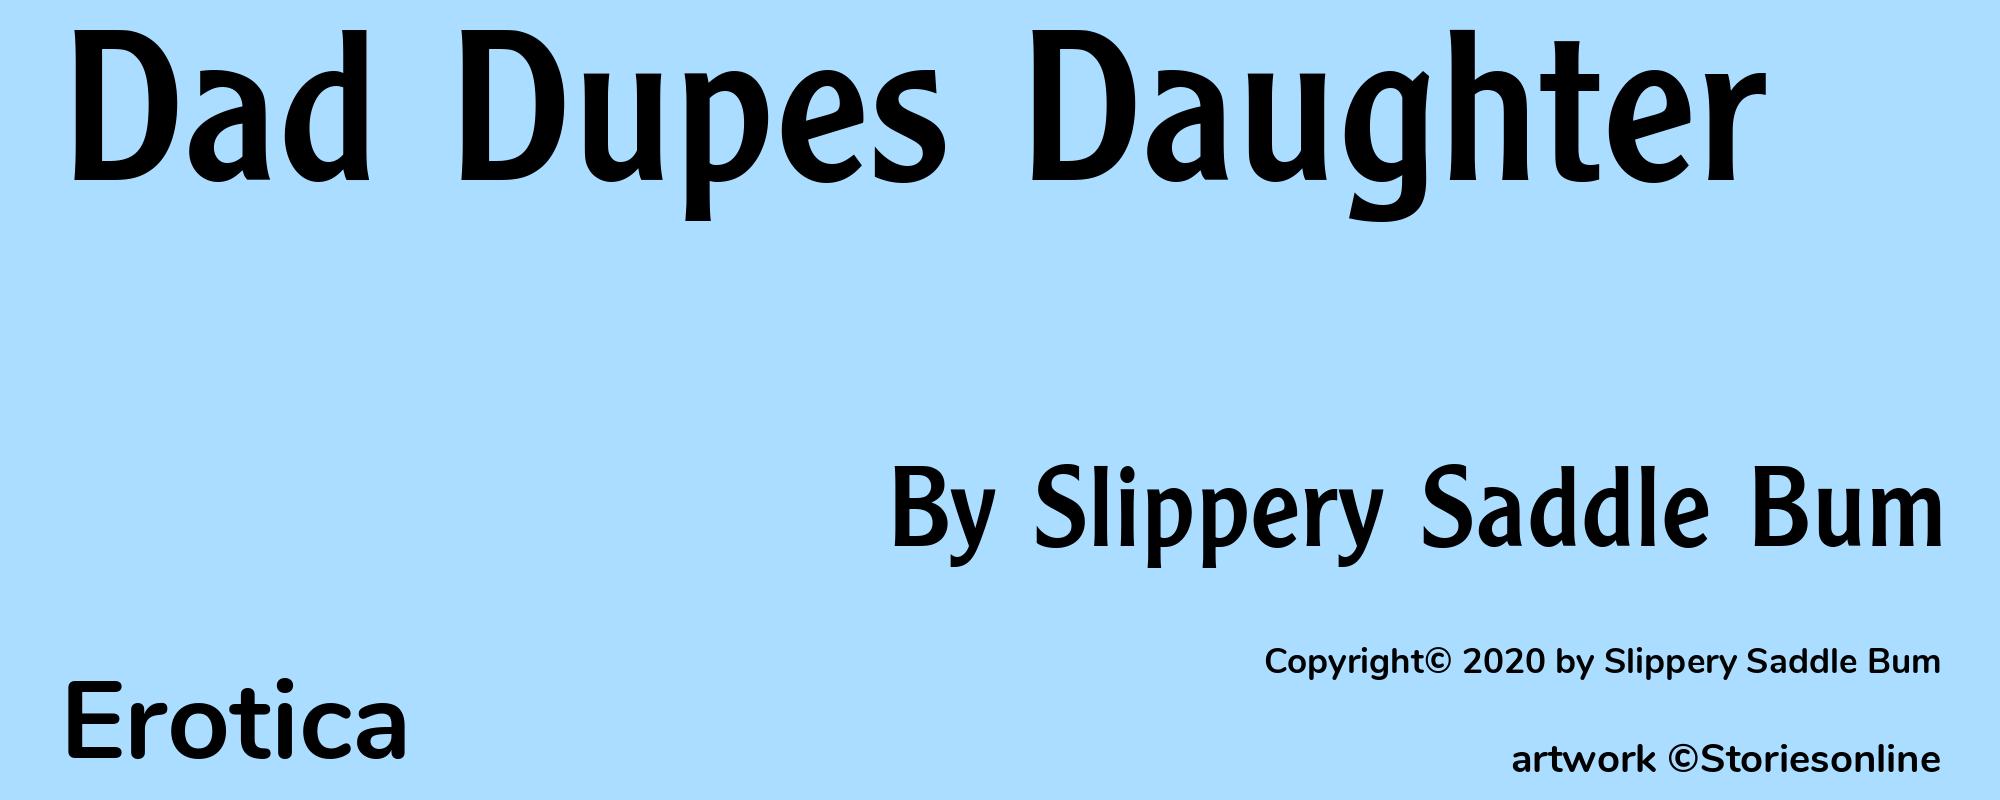 Dad Dupes Daughter - Cover